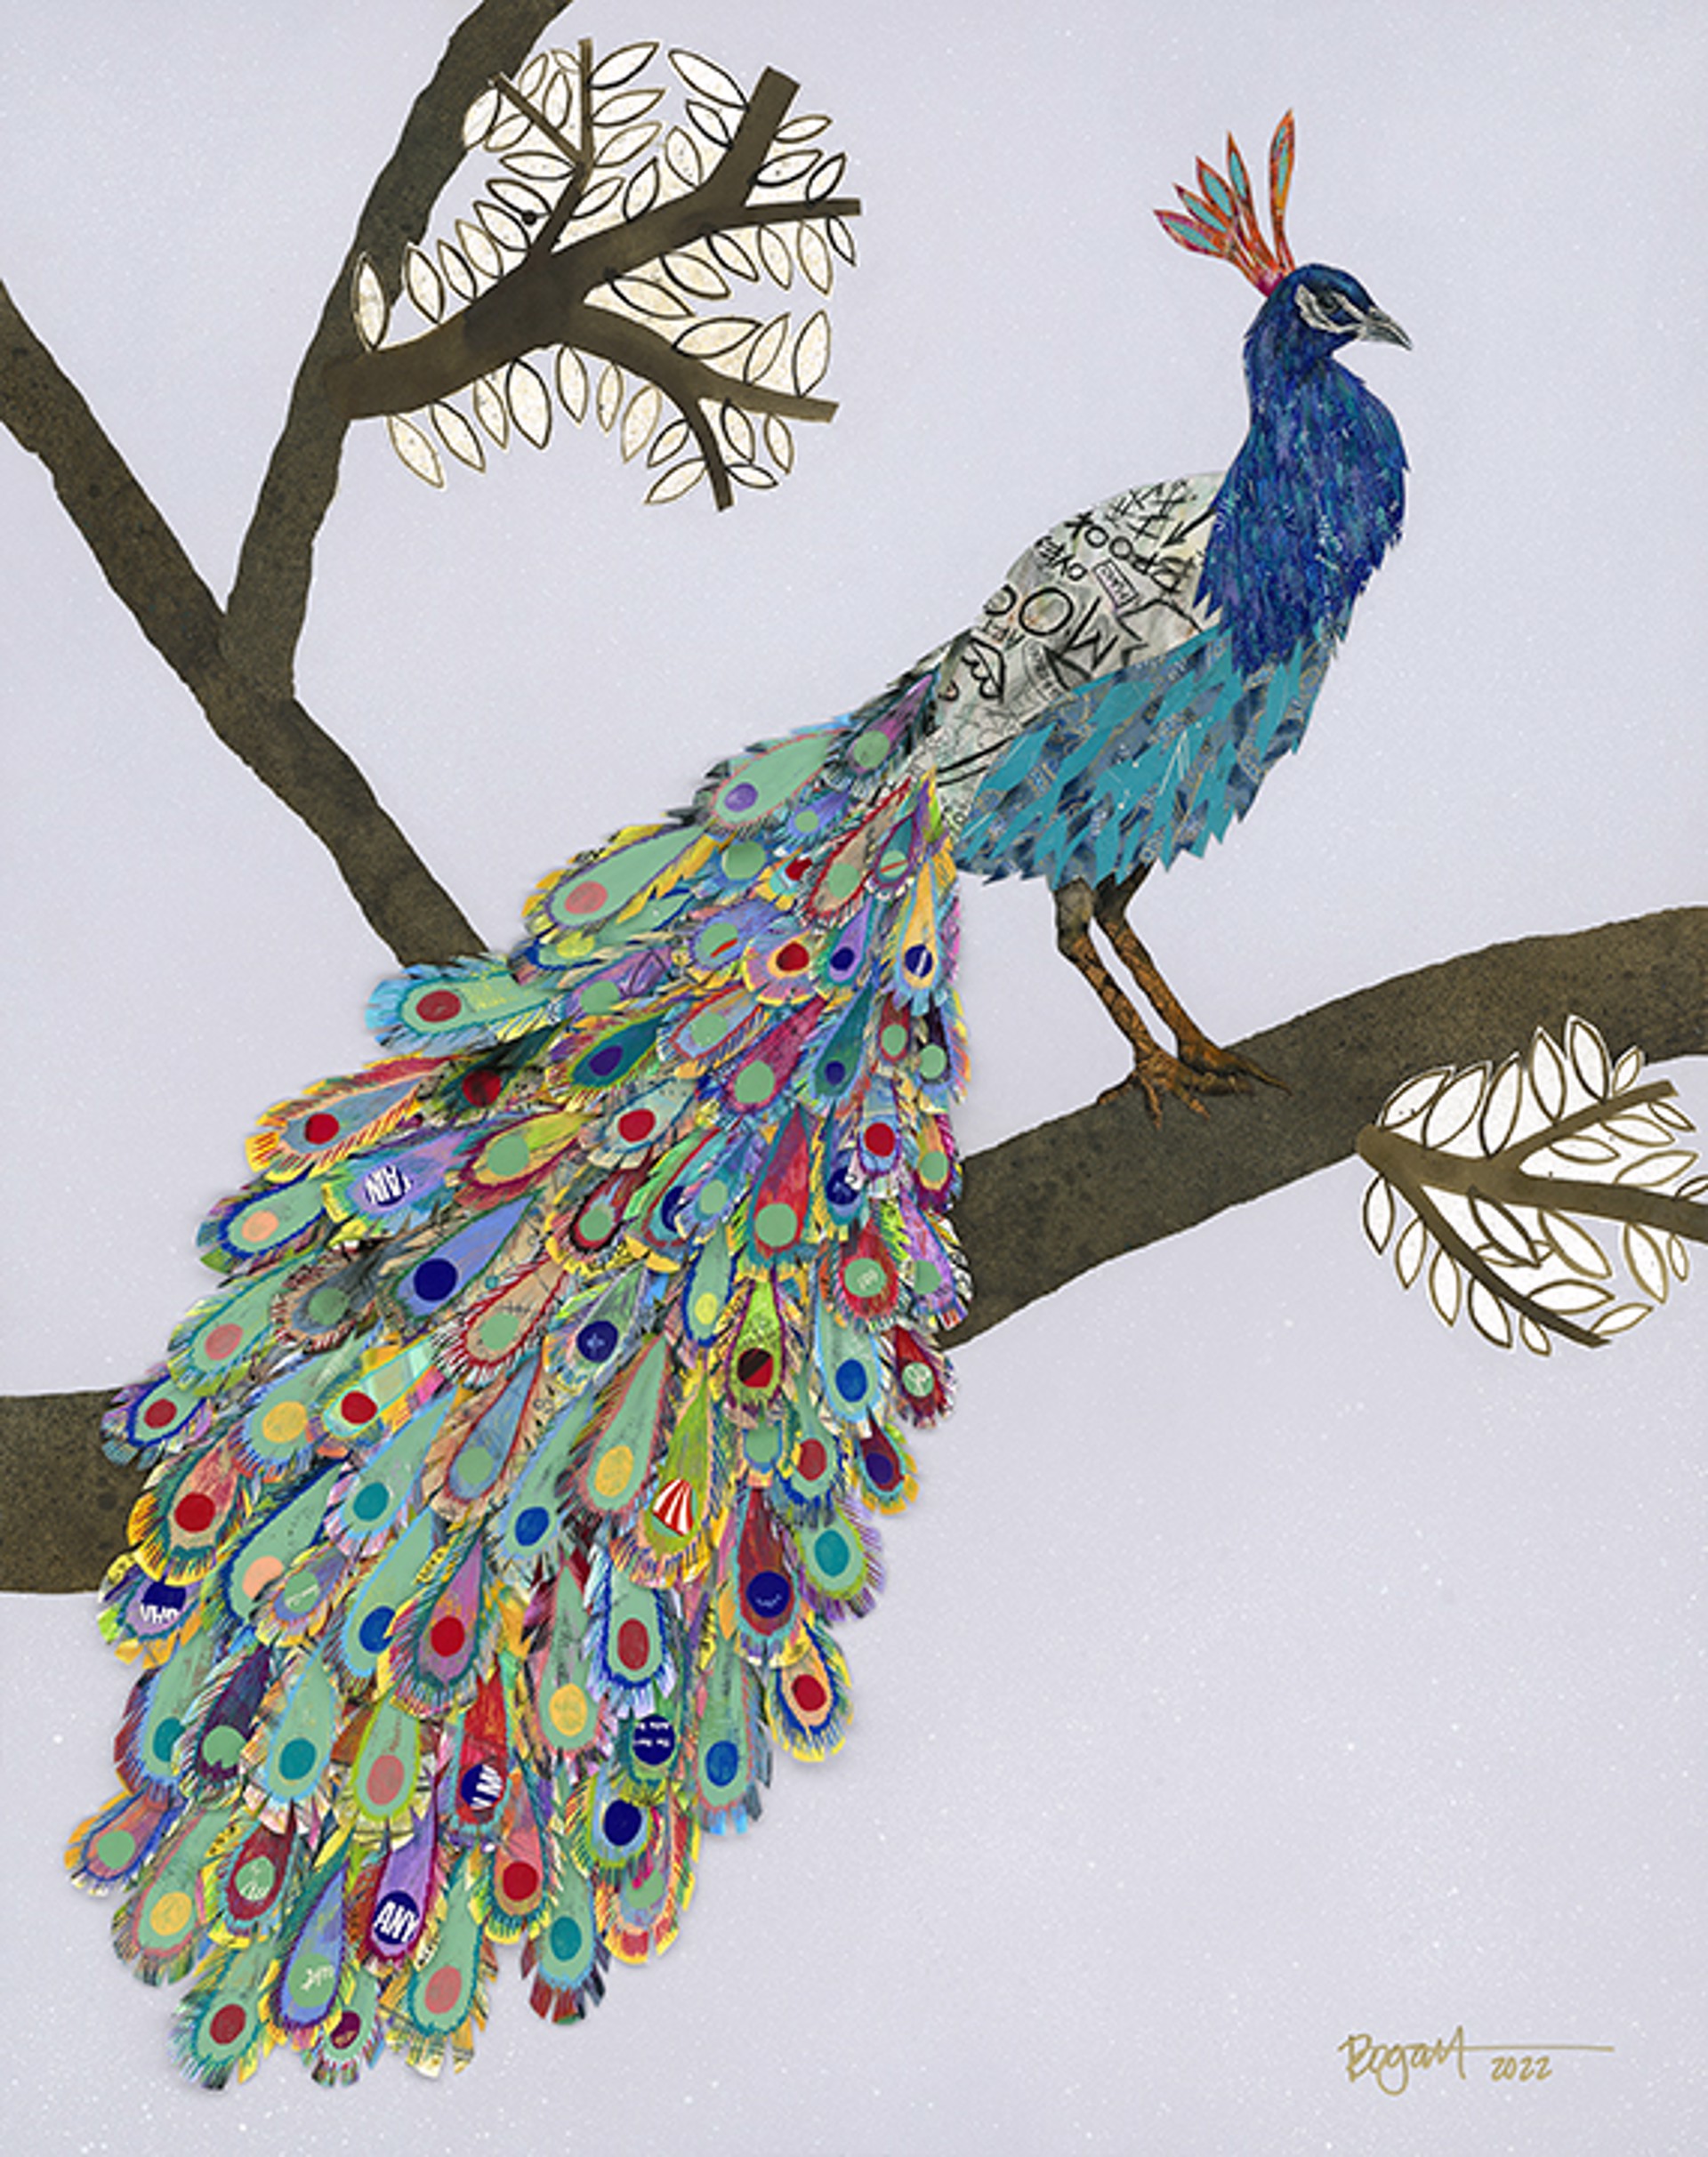 Paolo the Peacock by Brenda Bogart - Prints